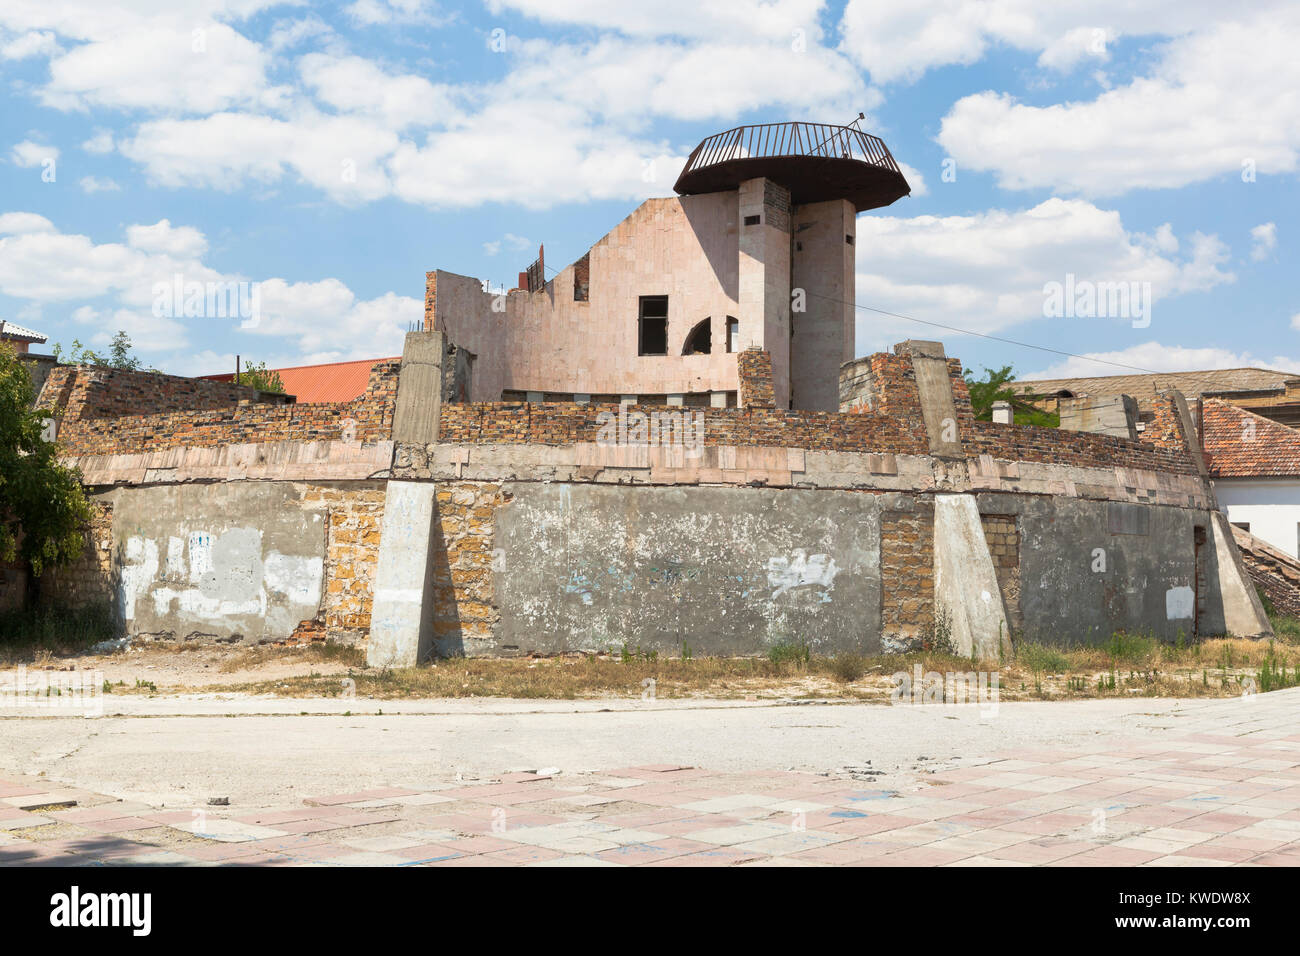 Abandoned unfinished building in the Mariners Square in Evpatoria, Crimea, Russia Stock Photo